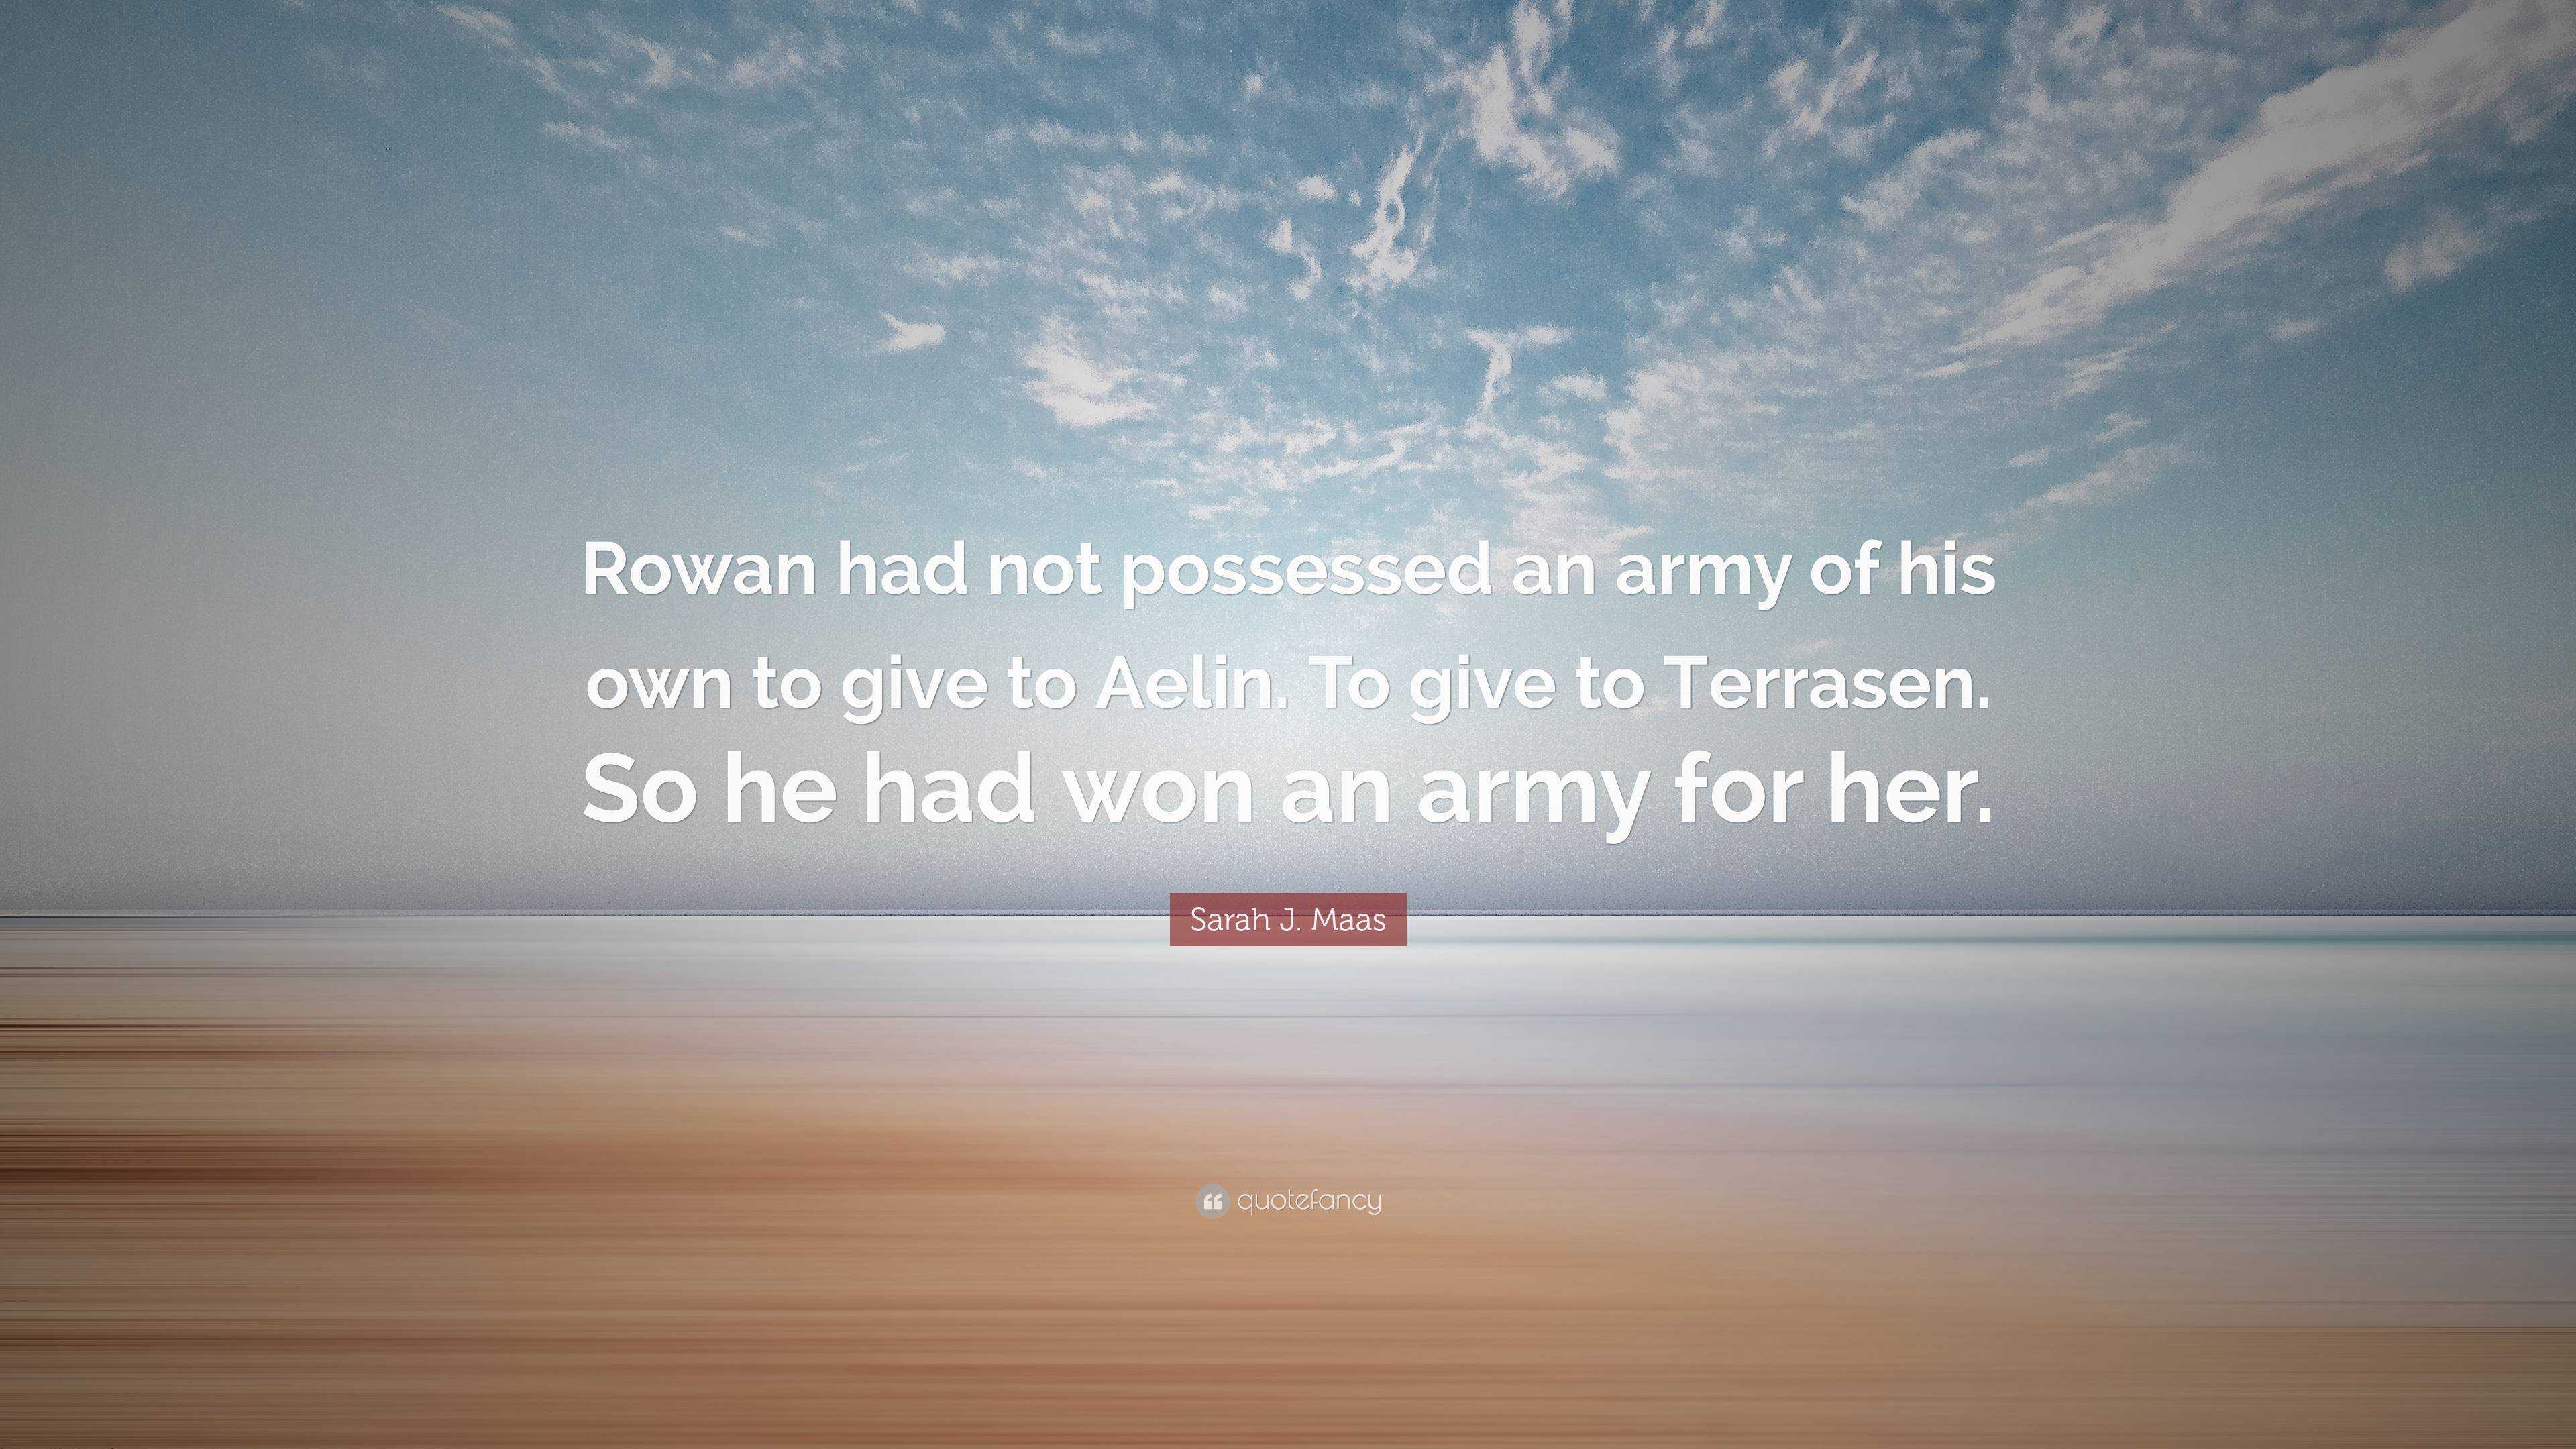 Sarah J Maas Quote Rowan Had Not Possessed An Army Of His Own To Give To Aelin To Give To